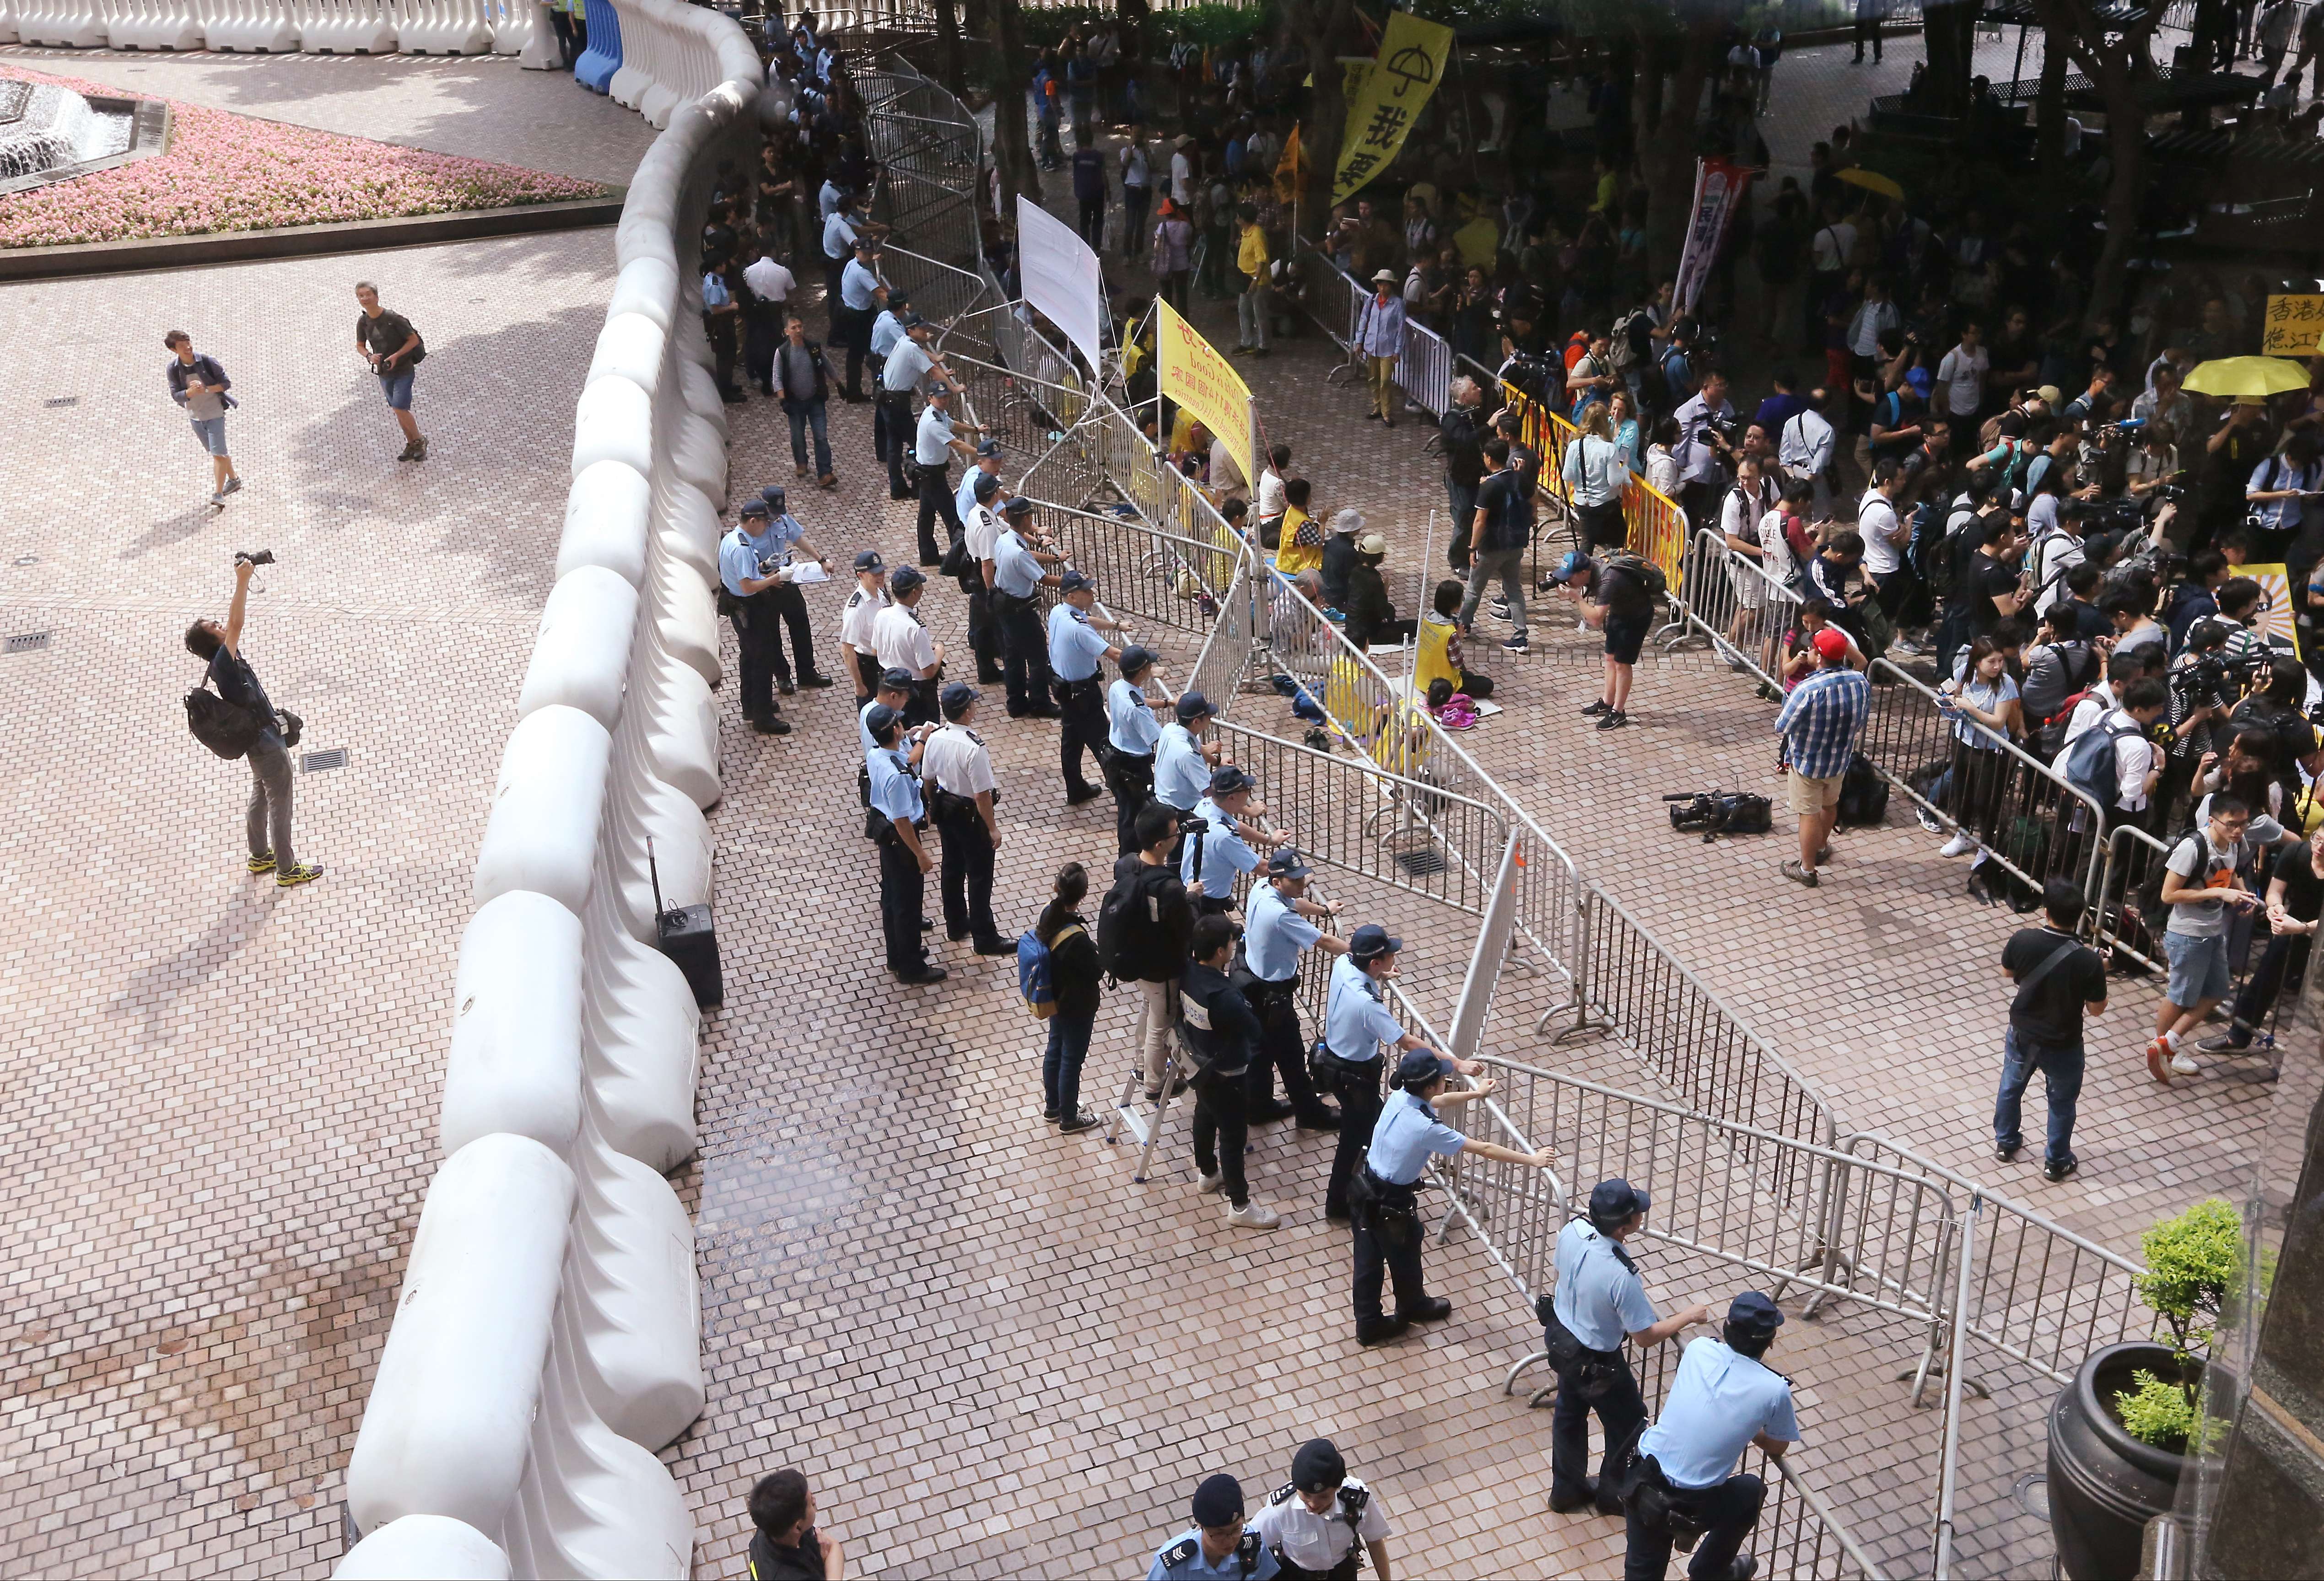 Pro-democracy protesters gather outside Central Plaza as Zhang Dejiang gave a keynote speech during his three-day visit to Hong Kong. Photo: Felix Wong